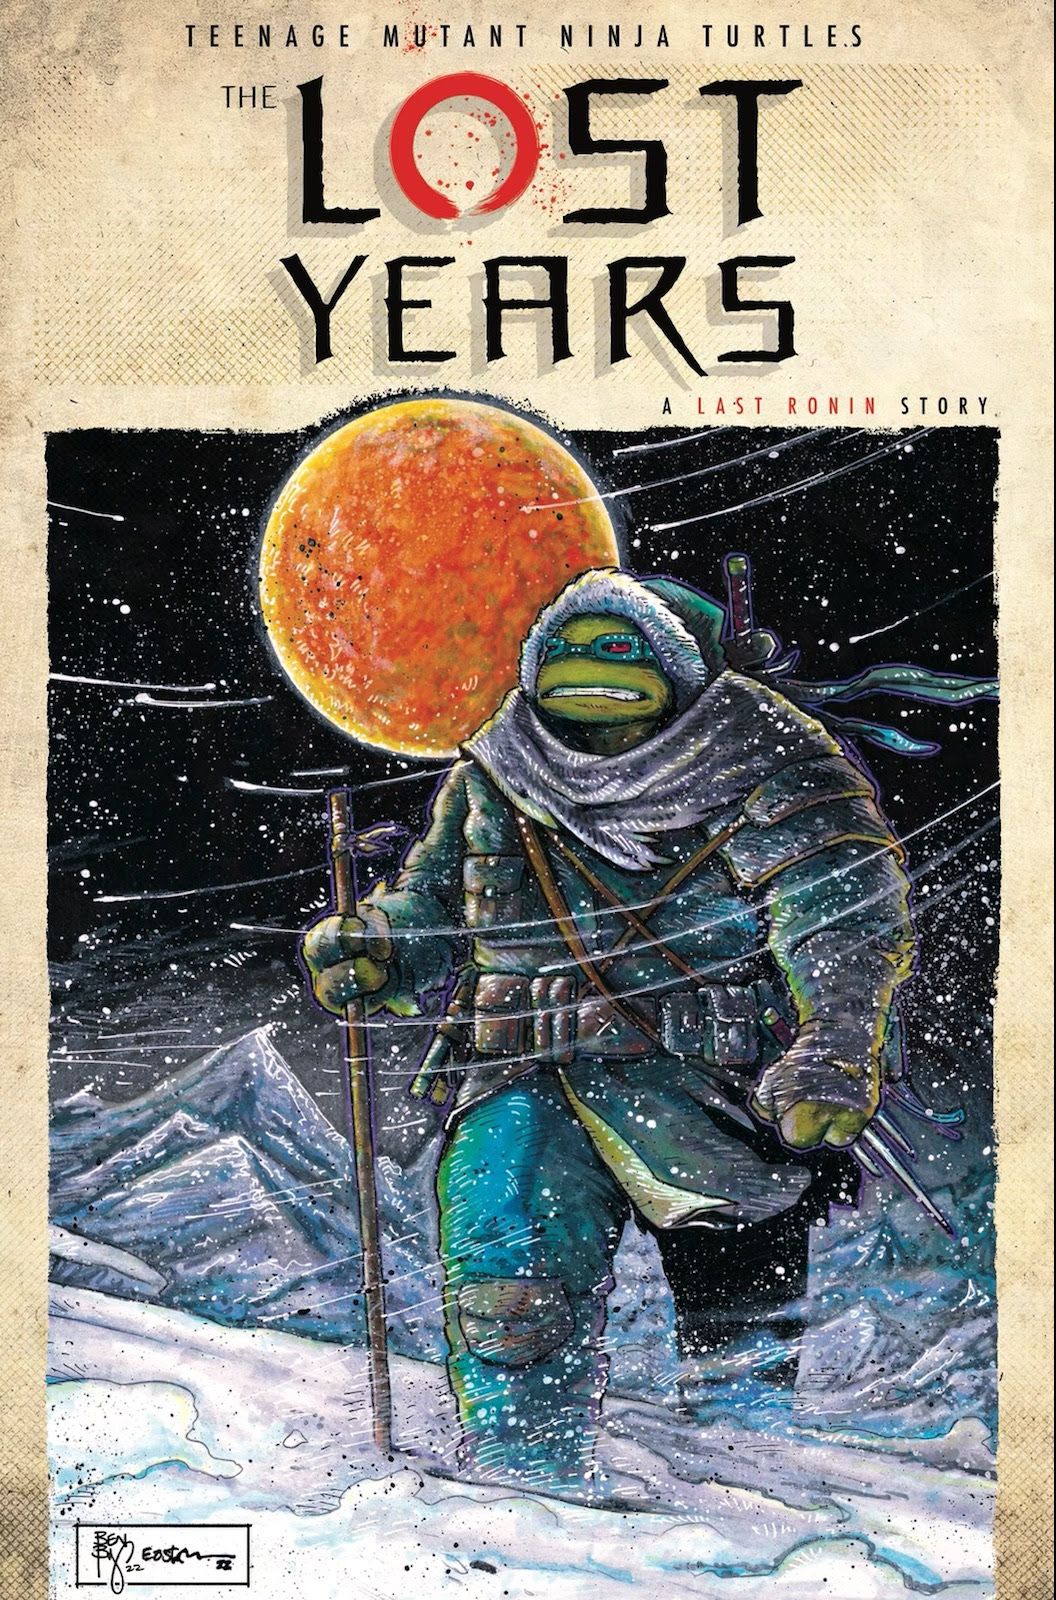 THE LOST YEAR - KEVIN EASTMAN ART